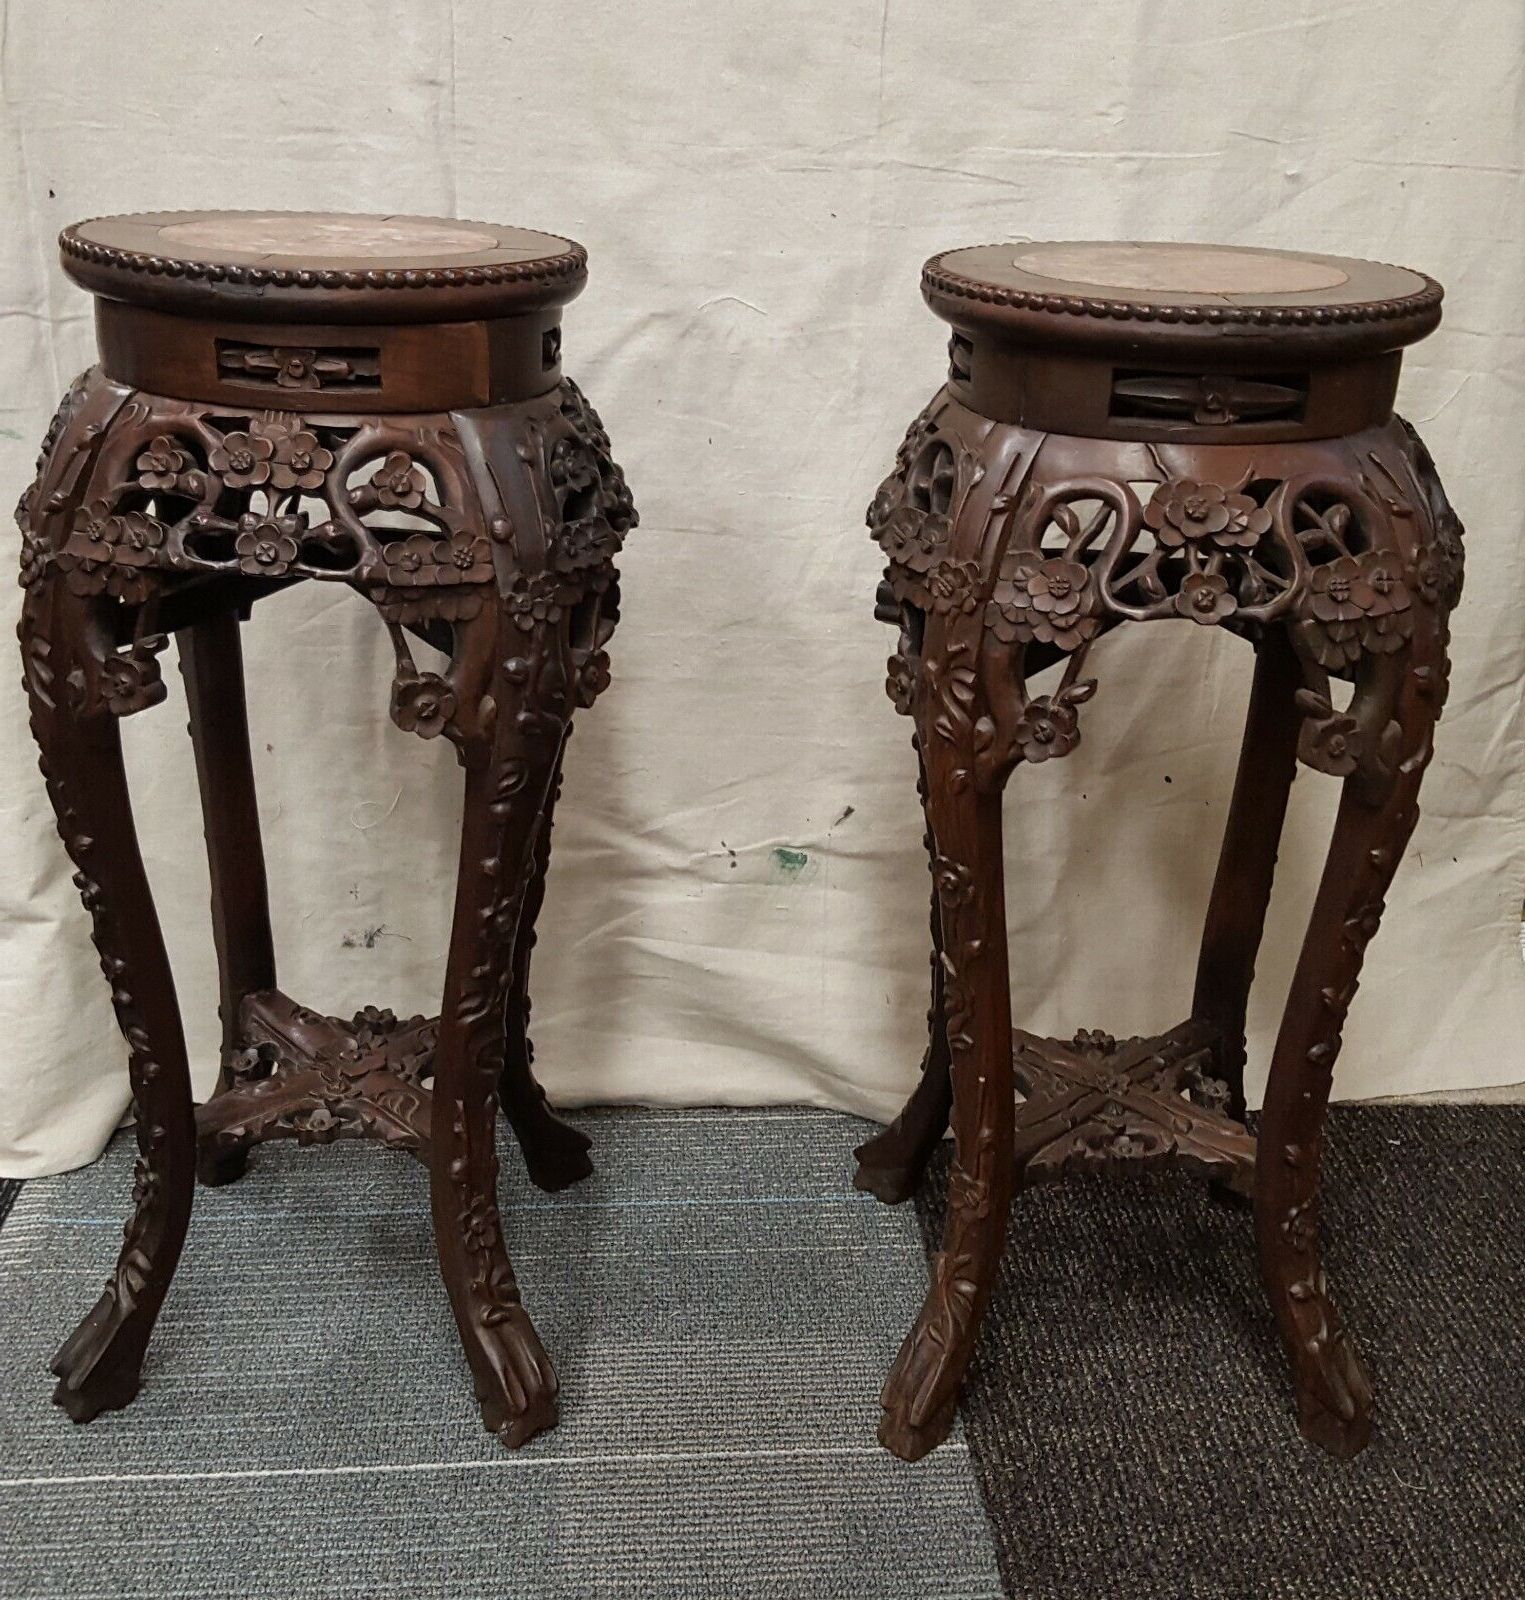 Ebay Intended For Carved Plant Stands (View 5 of 10)